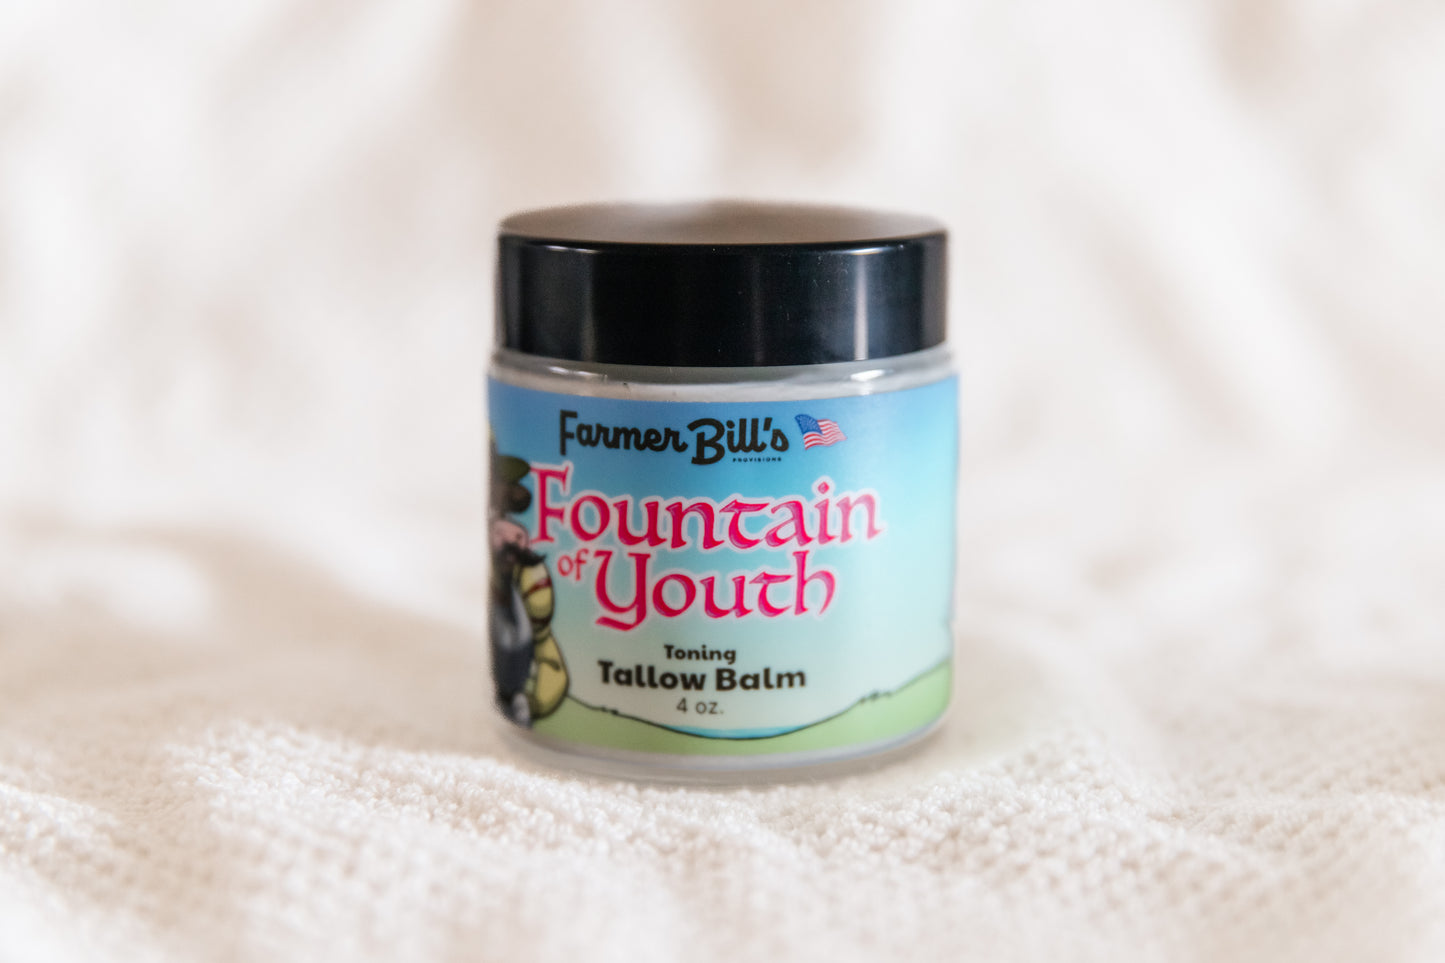 Fountain of Youth Grass-fed Toning Balm 4 oz.